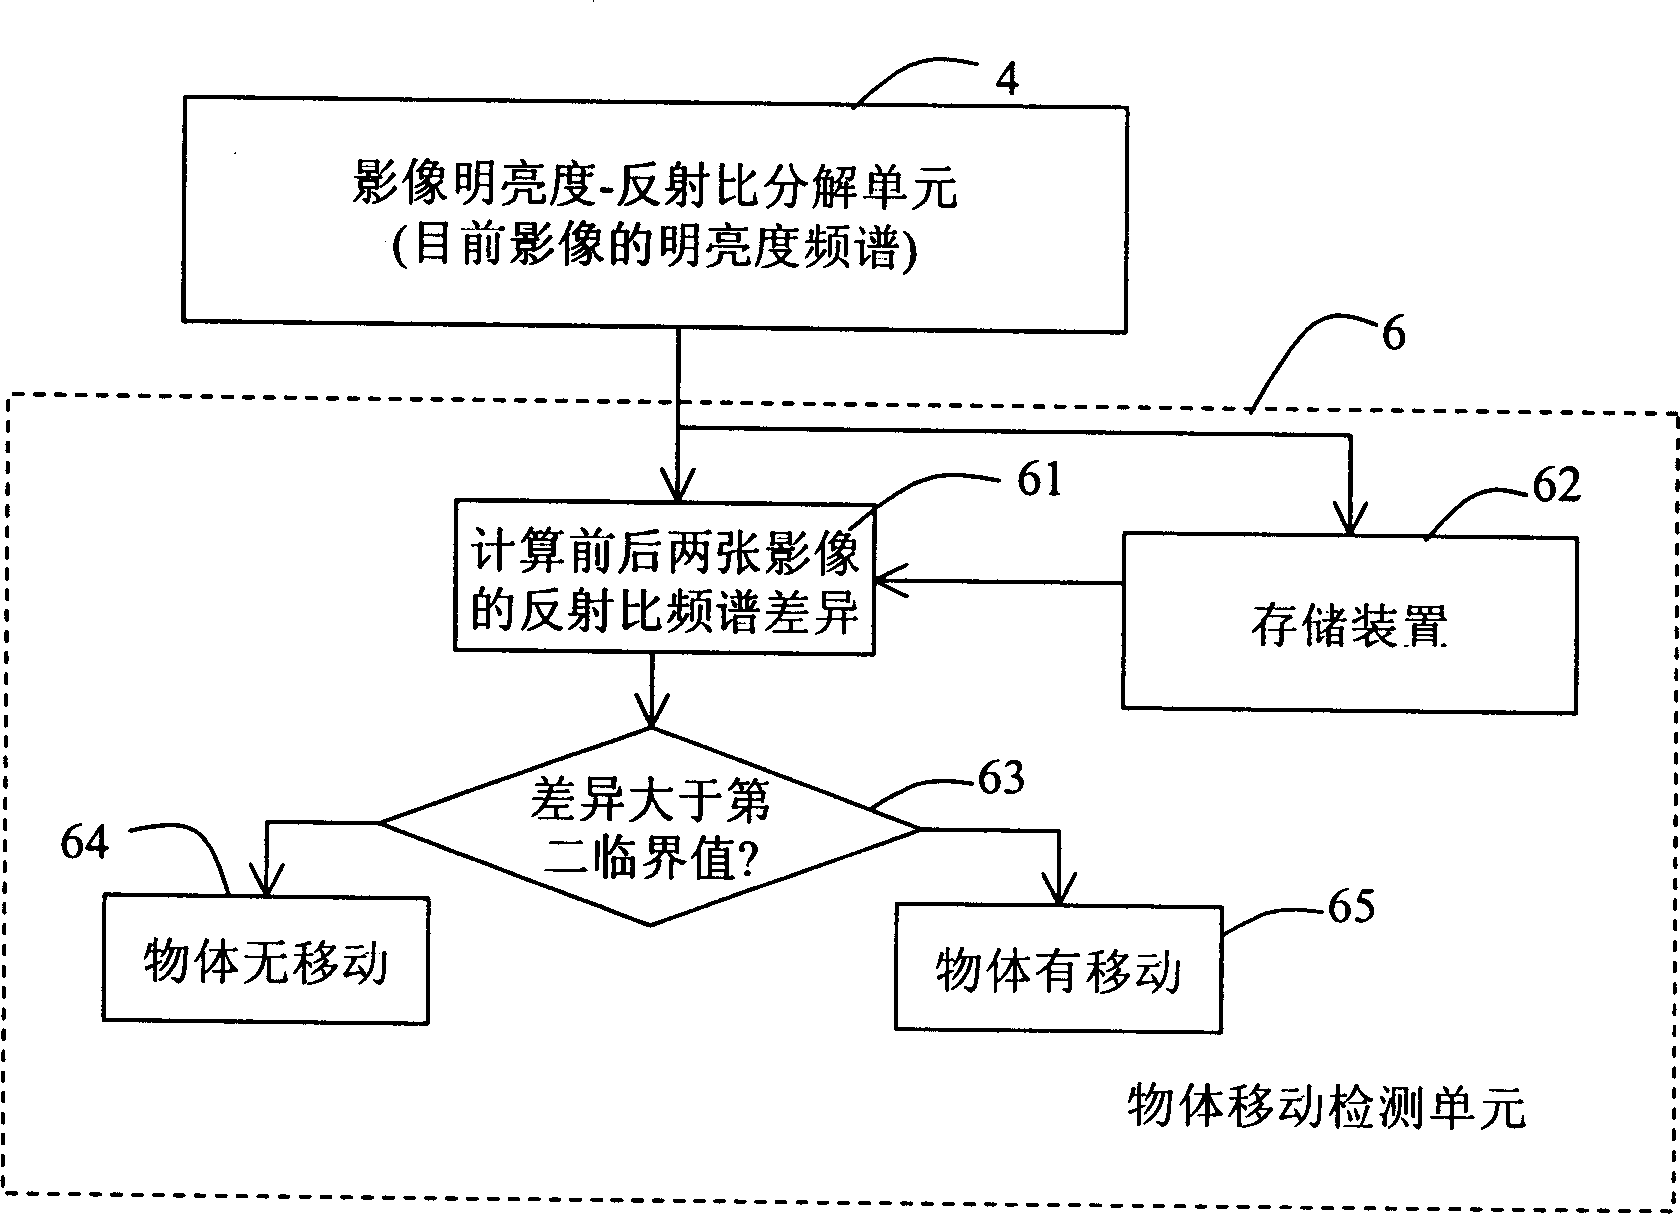 Digital image monitoring control system capable of automatic adjusting lens diaphragm and detecting object movement